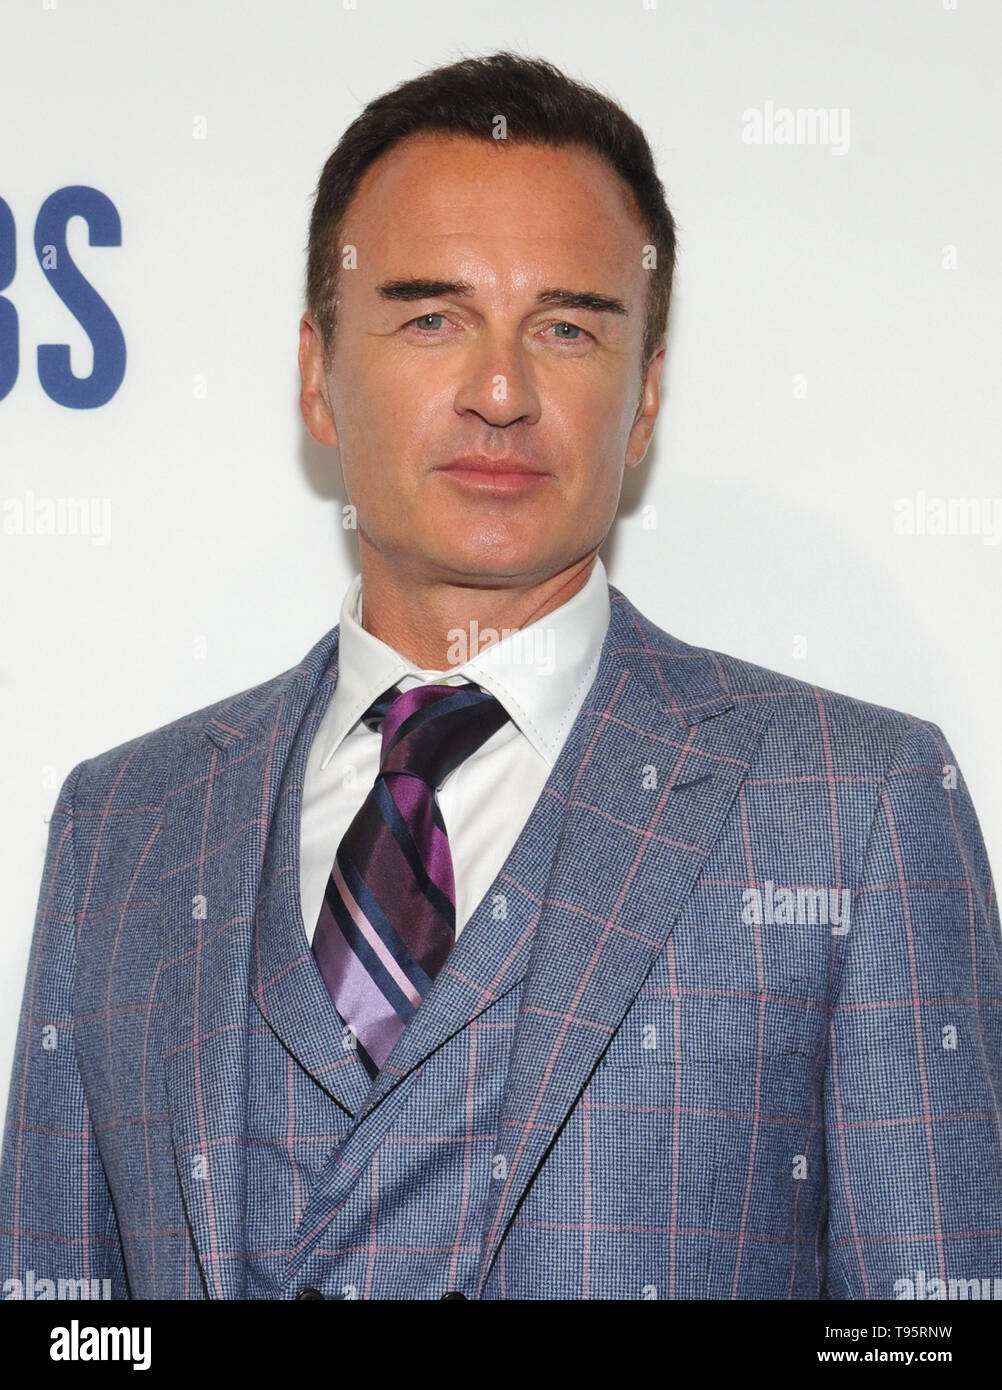 New York, NY, USA. 15th May, 2019. Julian McMahon attends the 2019 CBS Upfront presentation at the Plaza on May 15, 2019 in New York City. Credit: John Palmer/Media Punch/Alamy Live News Stock Photo